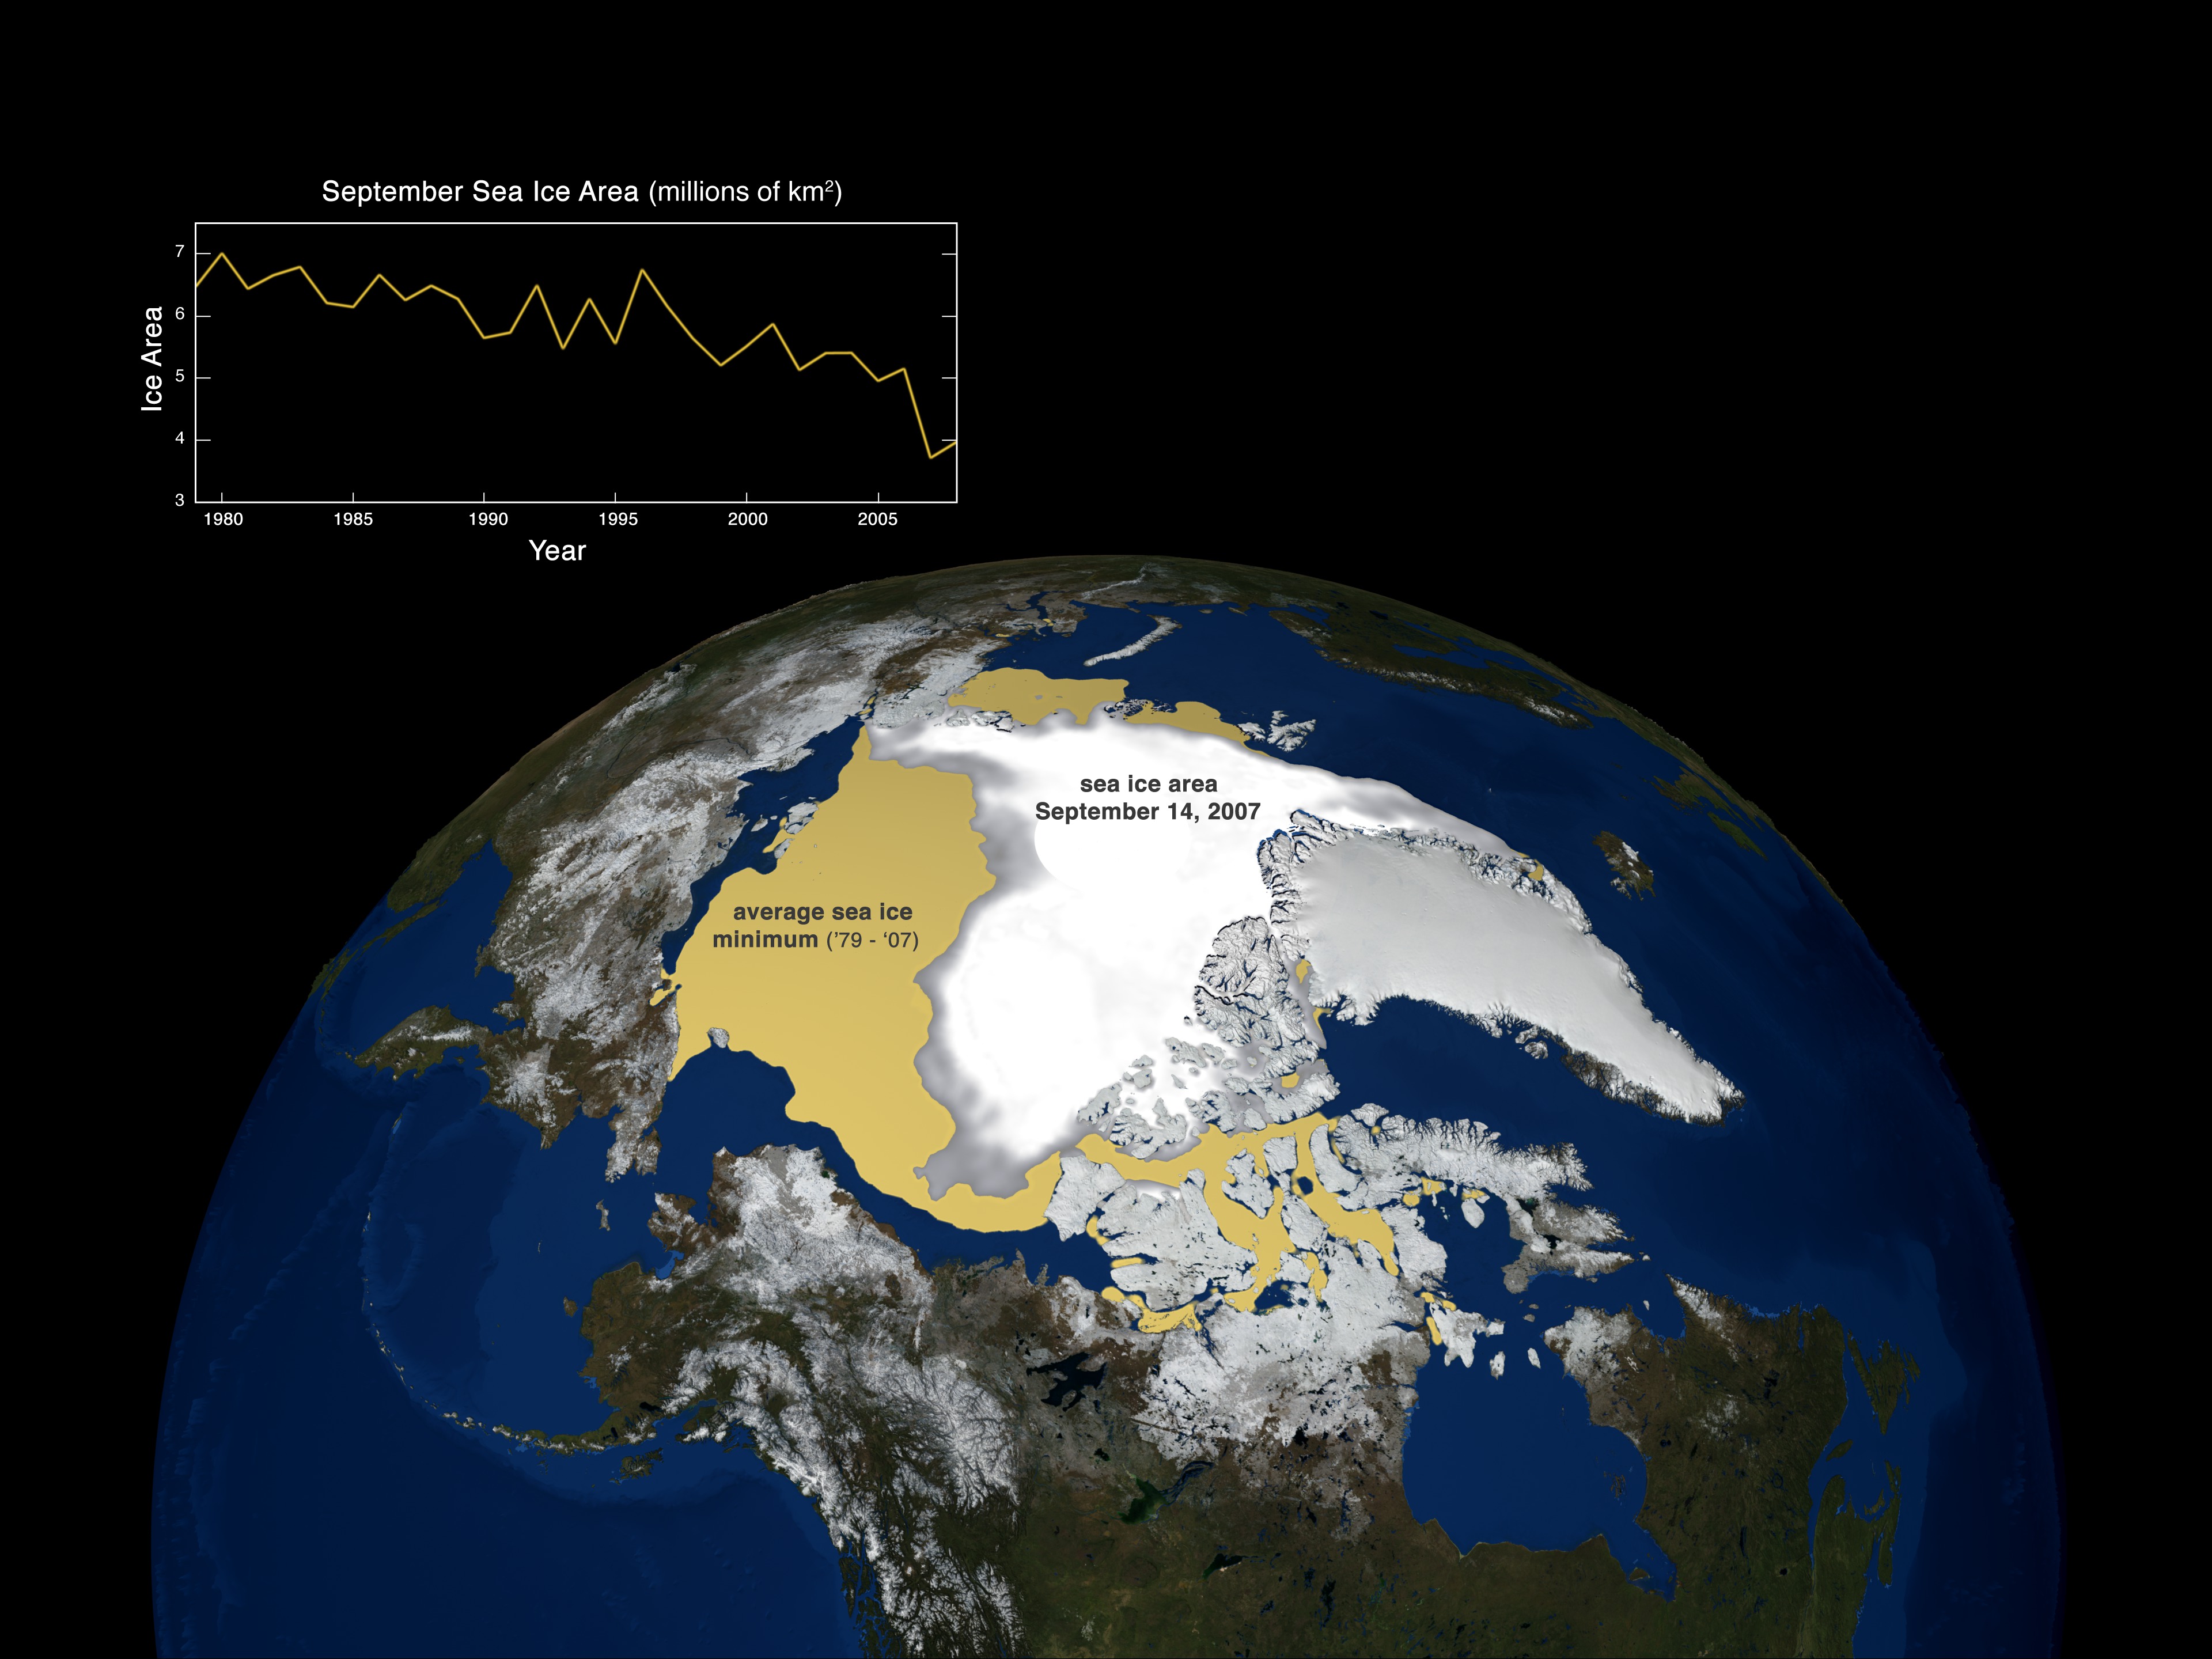 The sea ice image with labels and the graph inset